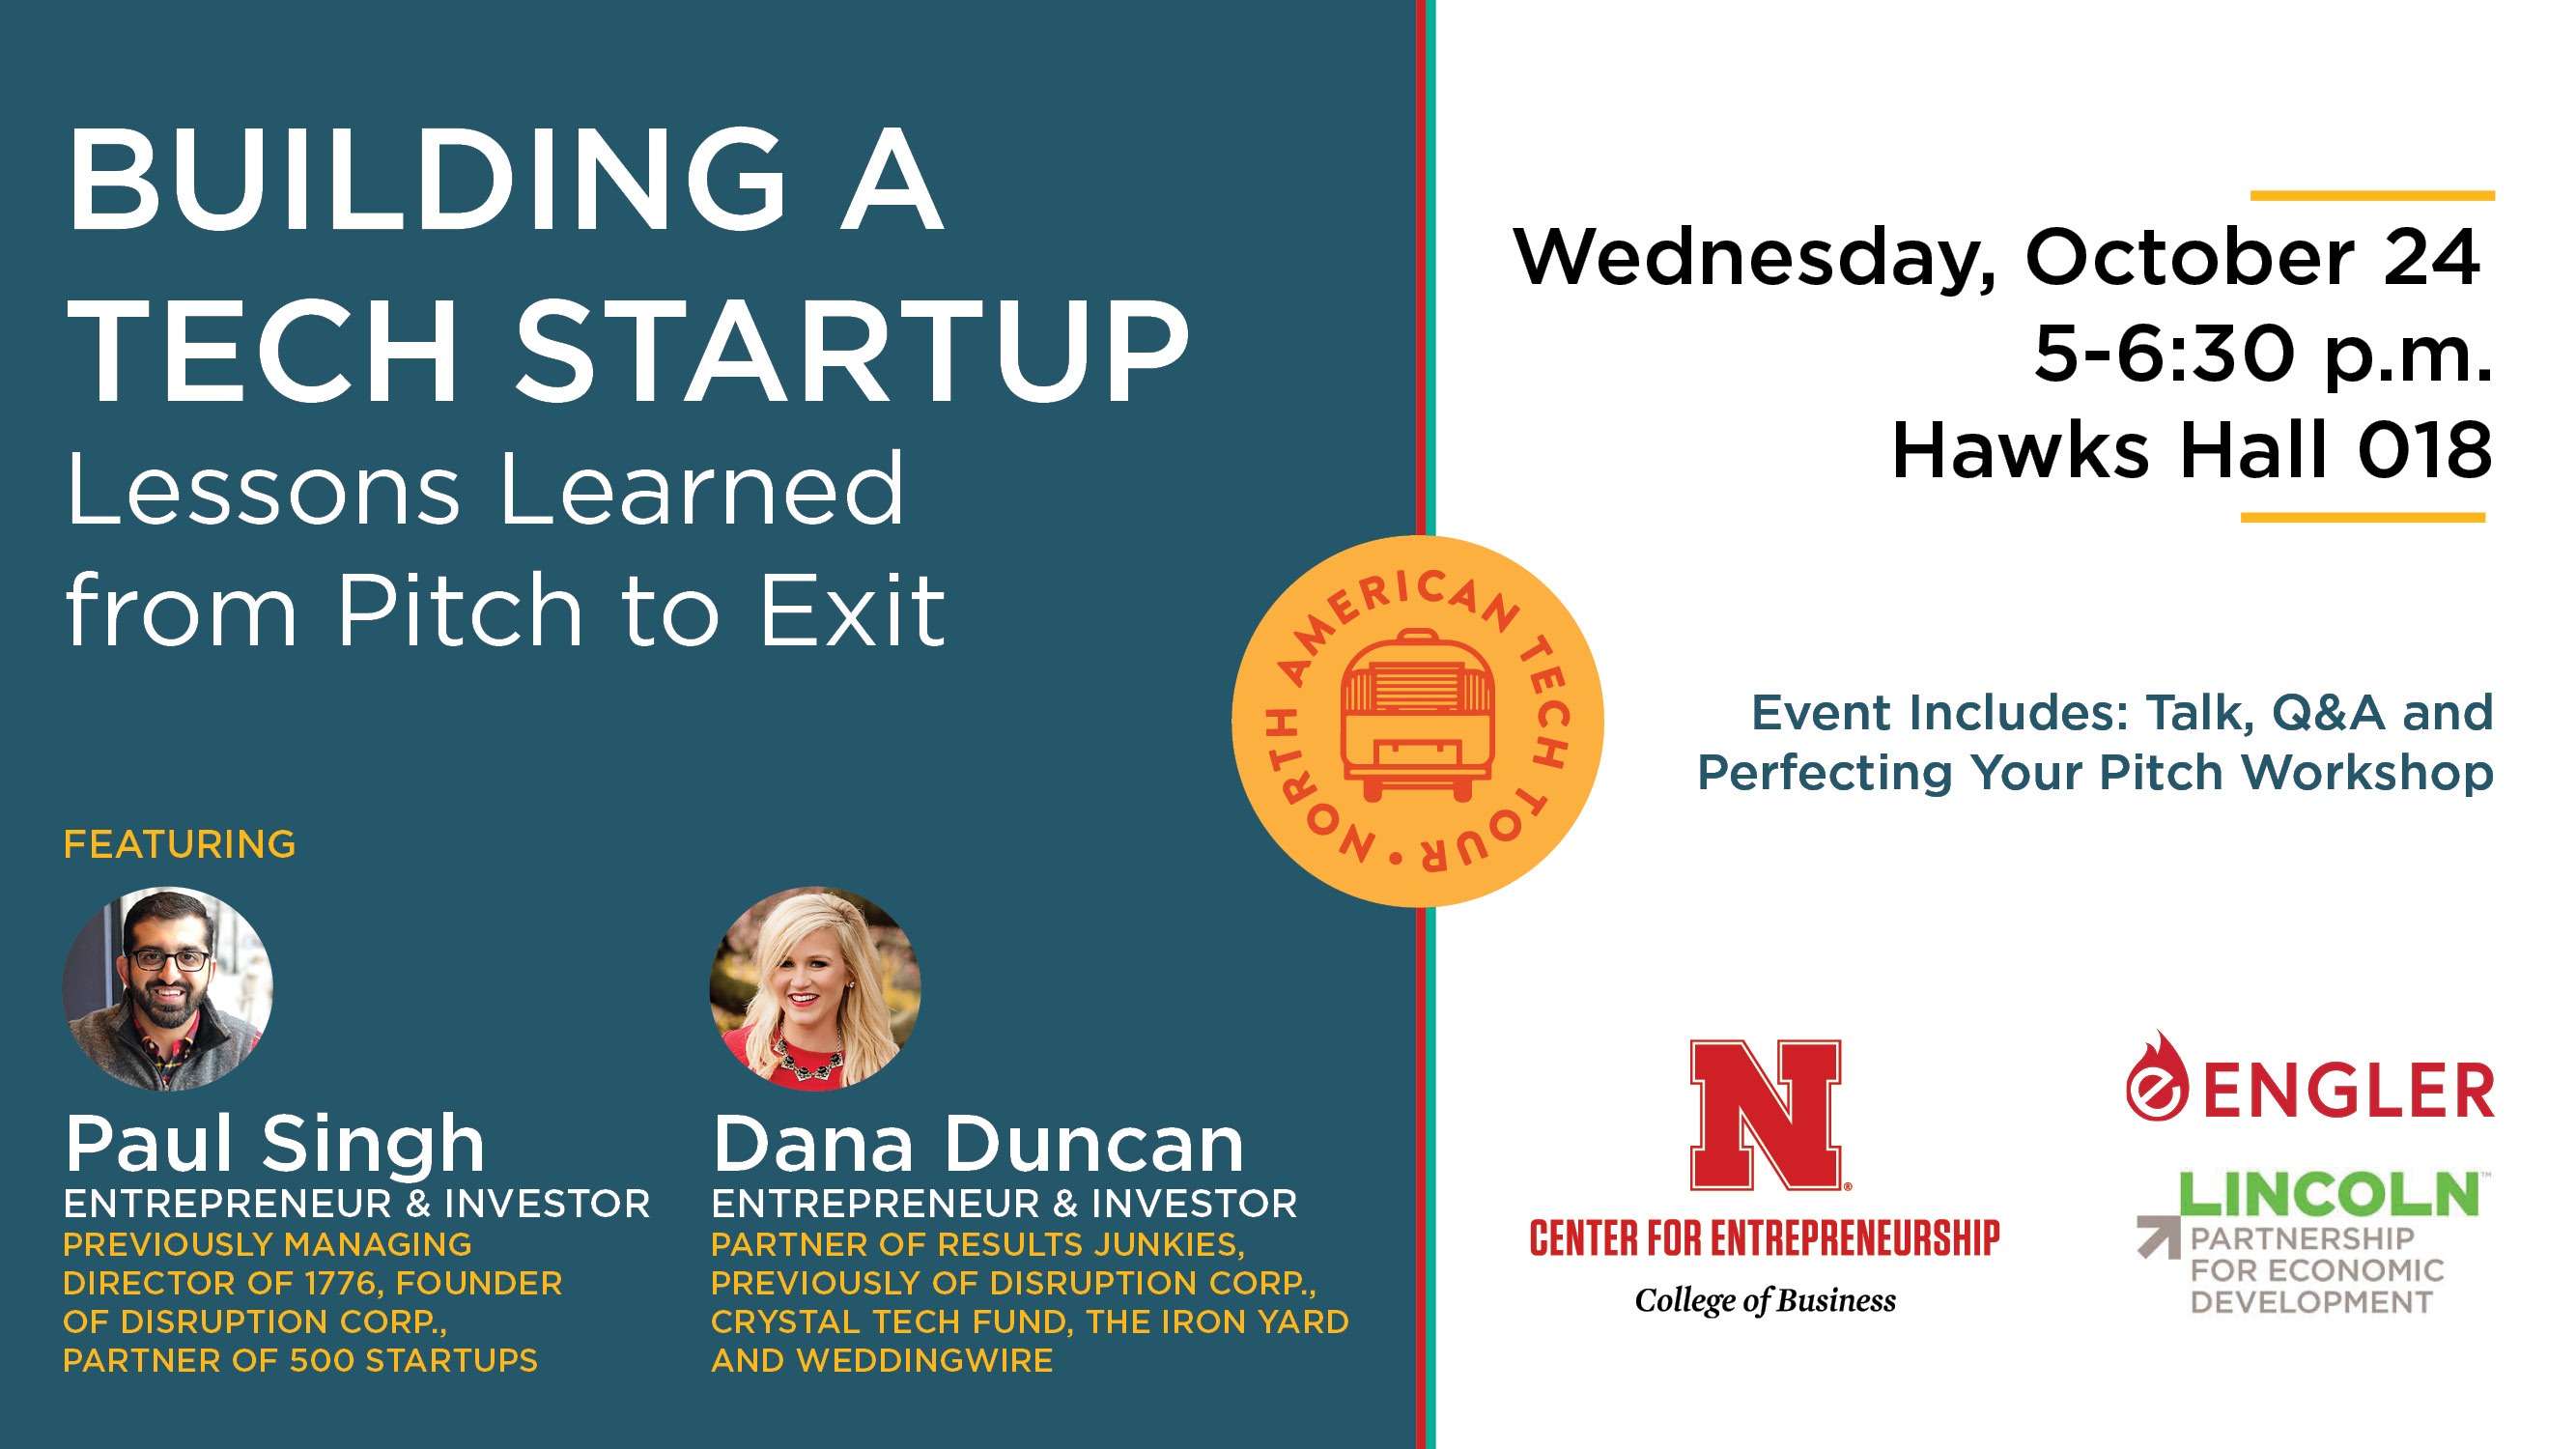 National Entrepreneurship Expert Coming to College of Business